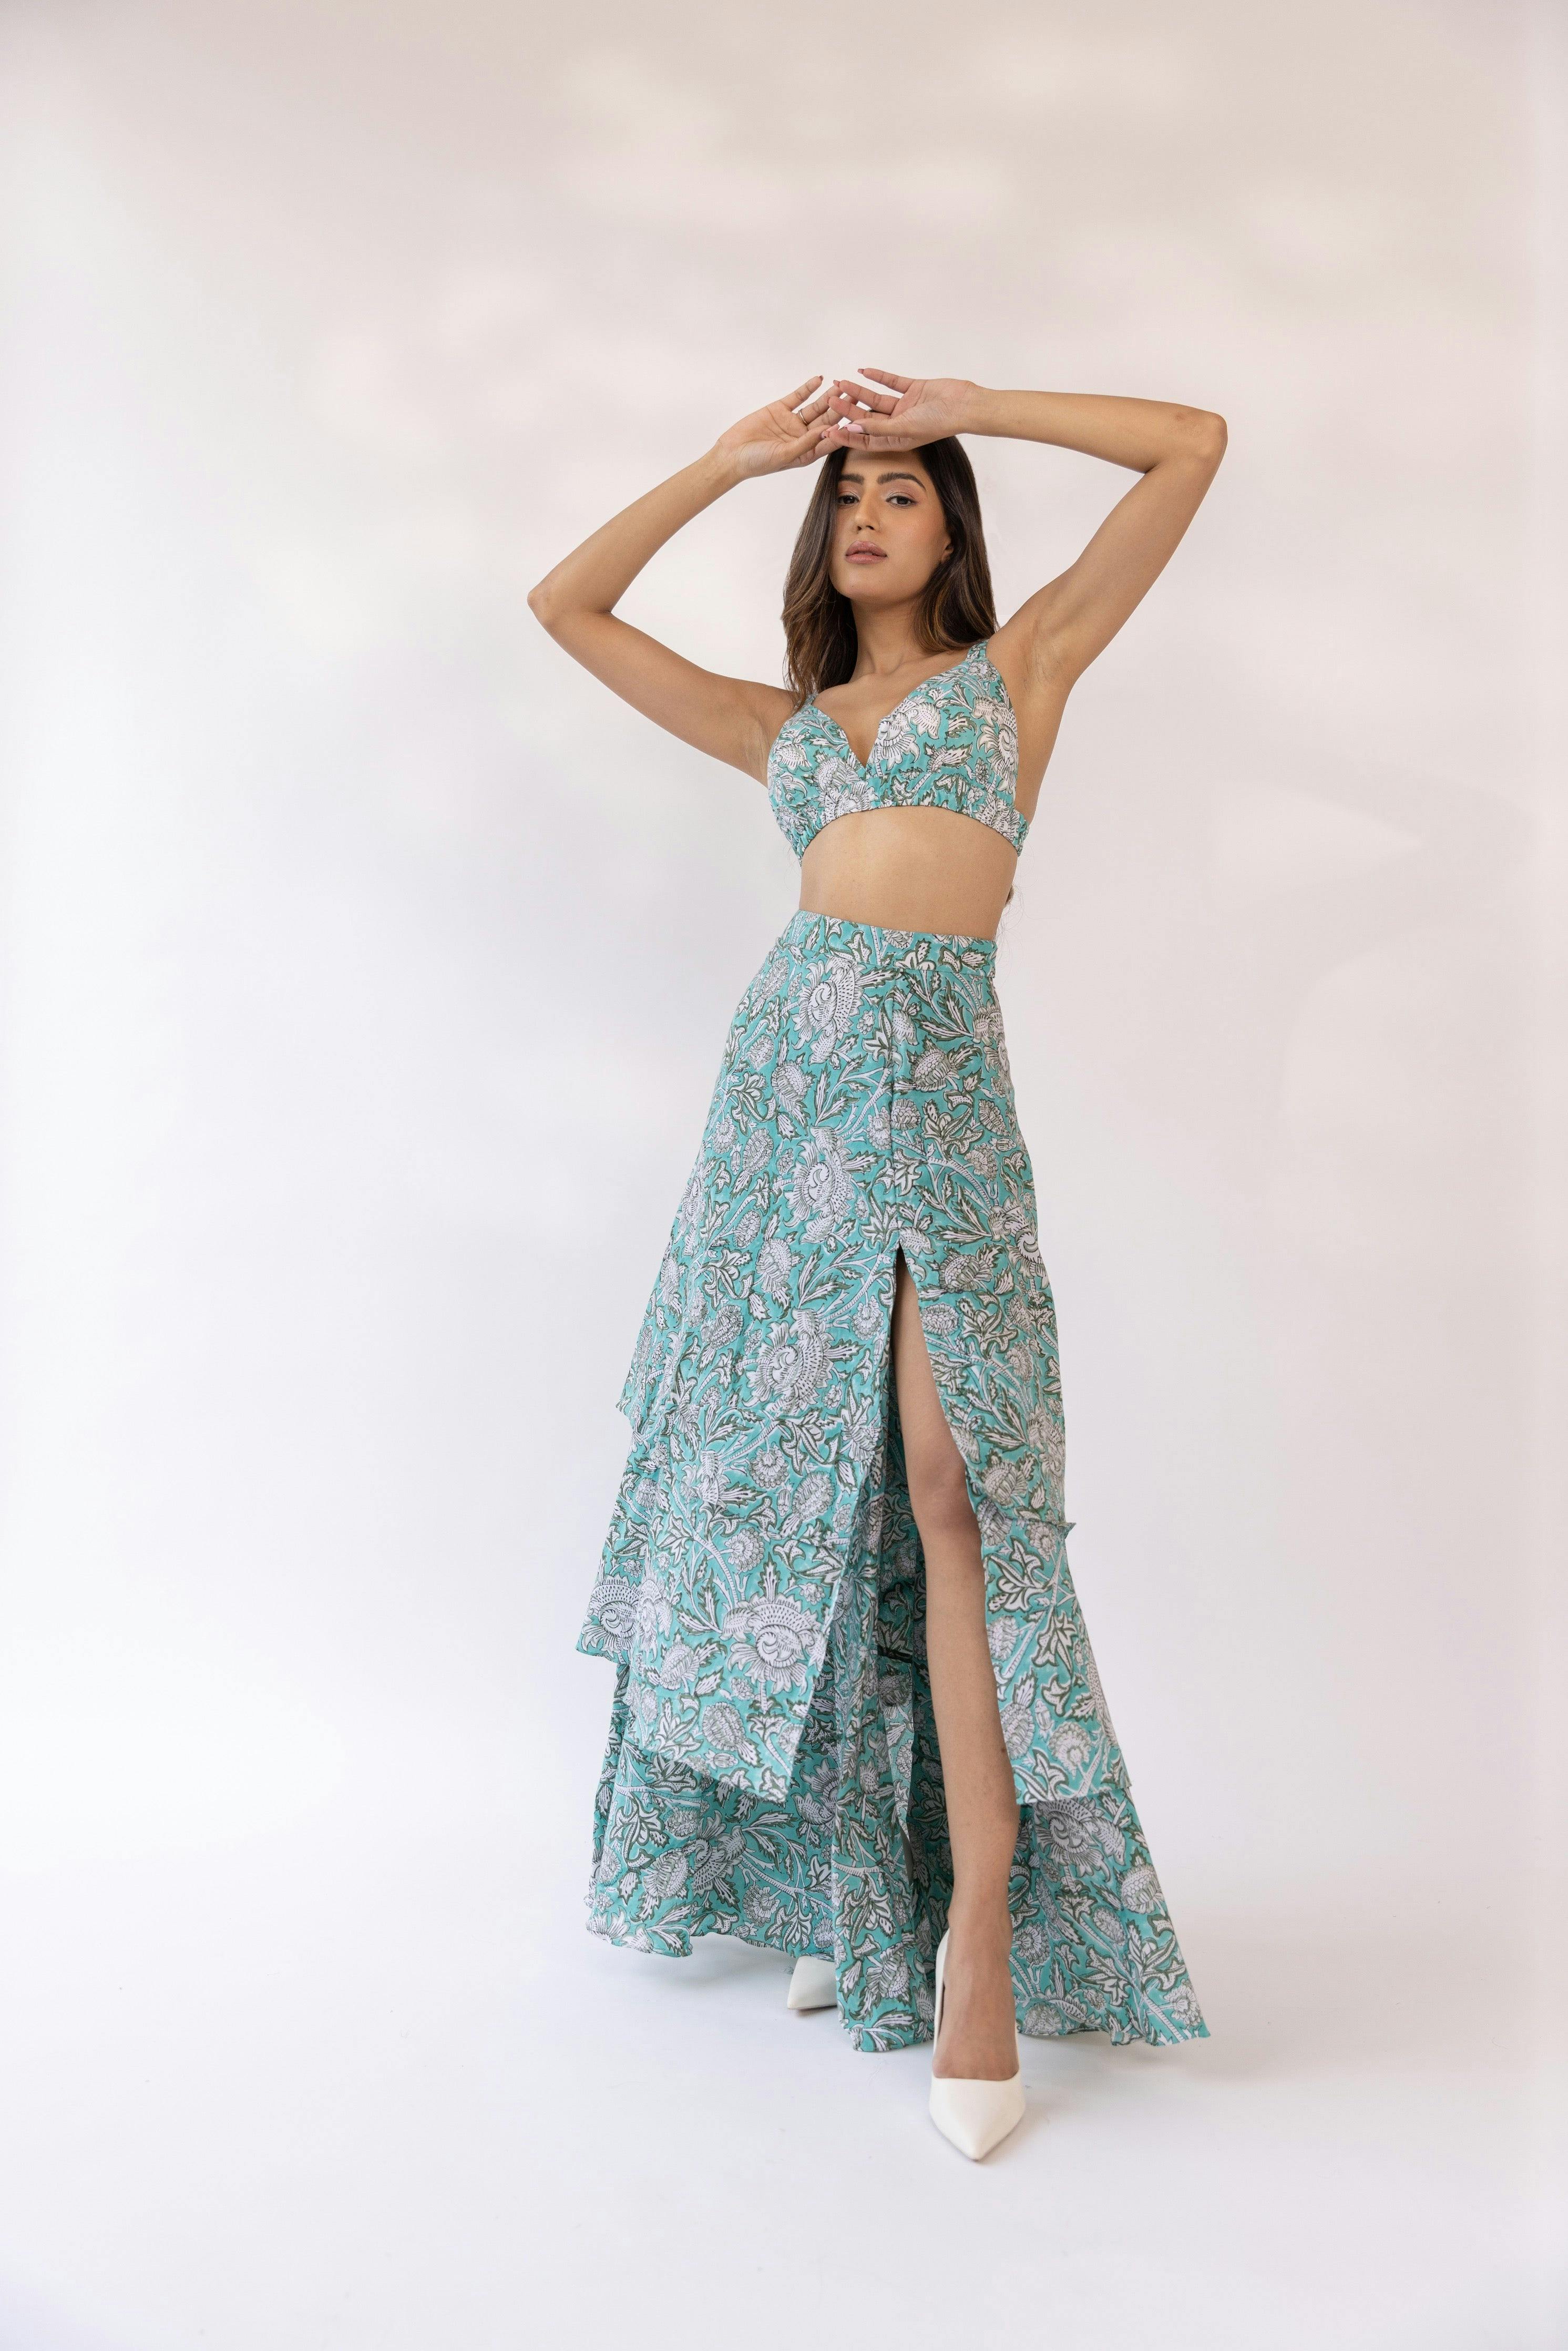 Azarin Blockpirnted Bralette And Frilly Long Skirt, a product by Shaakha